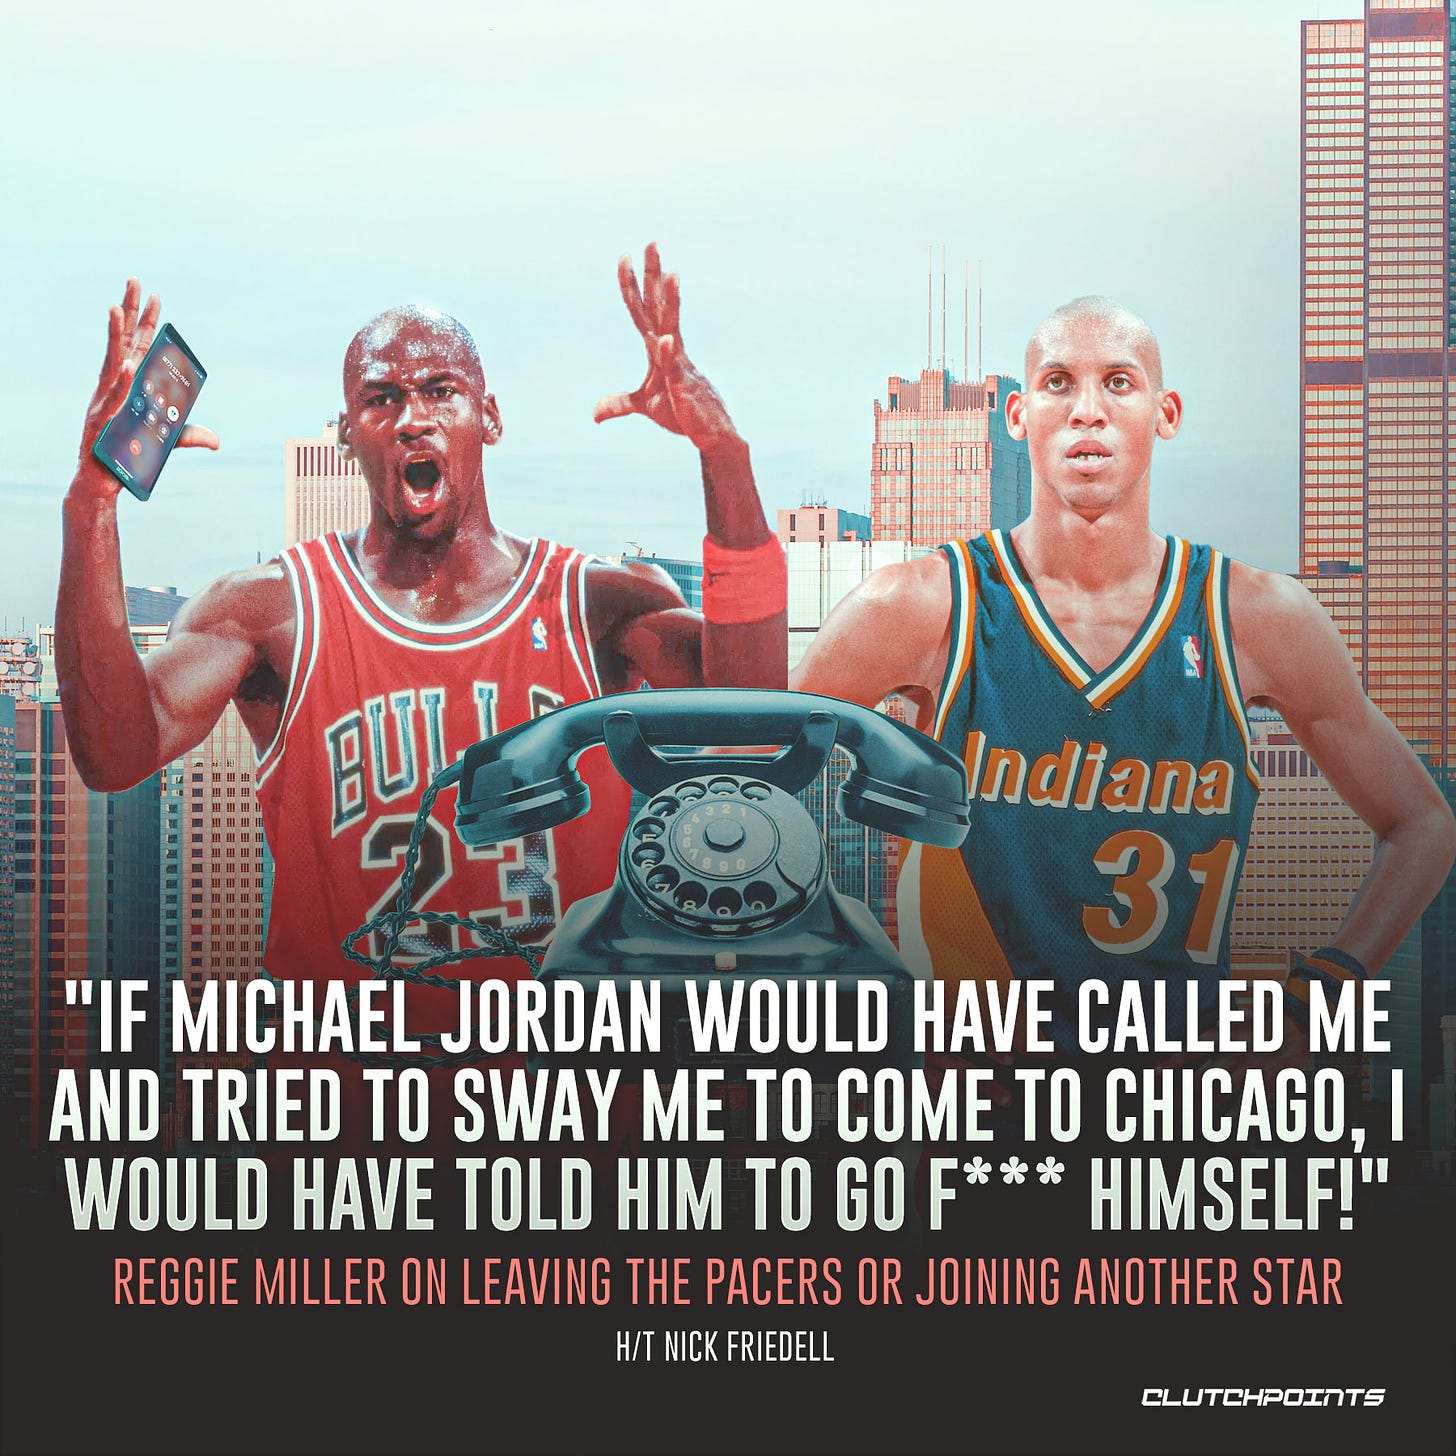 May be an image of 1 person and text that says 'Indiana "IF MICHAEL JORDAN WOULD HAVE CALLED ME AND TRIED TO SWAY ME TO COME TO CHICAGO, WOULD HAVE TOLD HIM TO GO HIMSELF!" REGGIE MILLER ON LEAVING THE PACERS OR JOINING ANOTHER STAR H/T NICK FRIEDELL CLUTCHPOINTS'